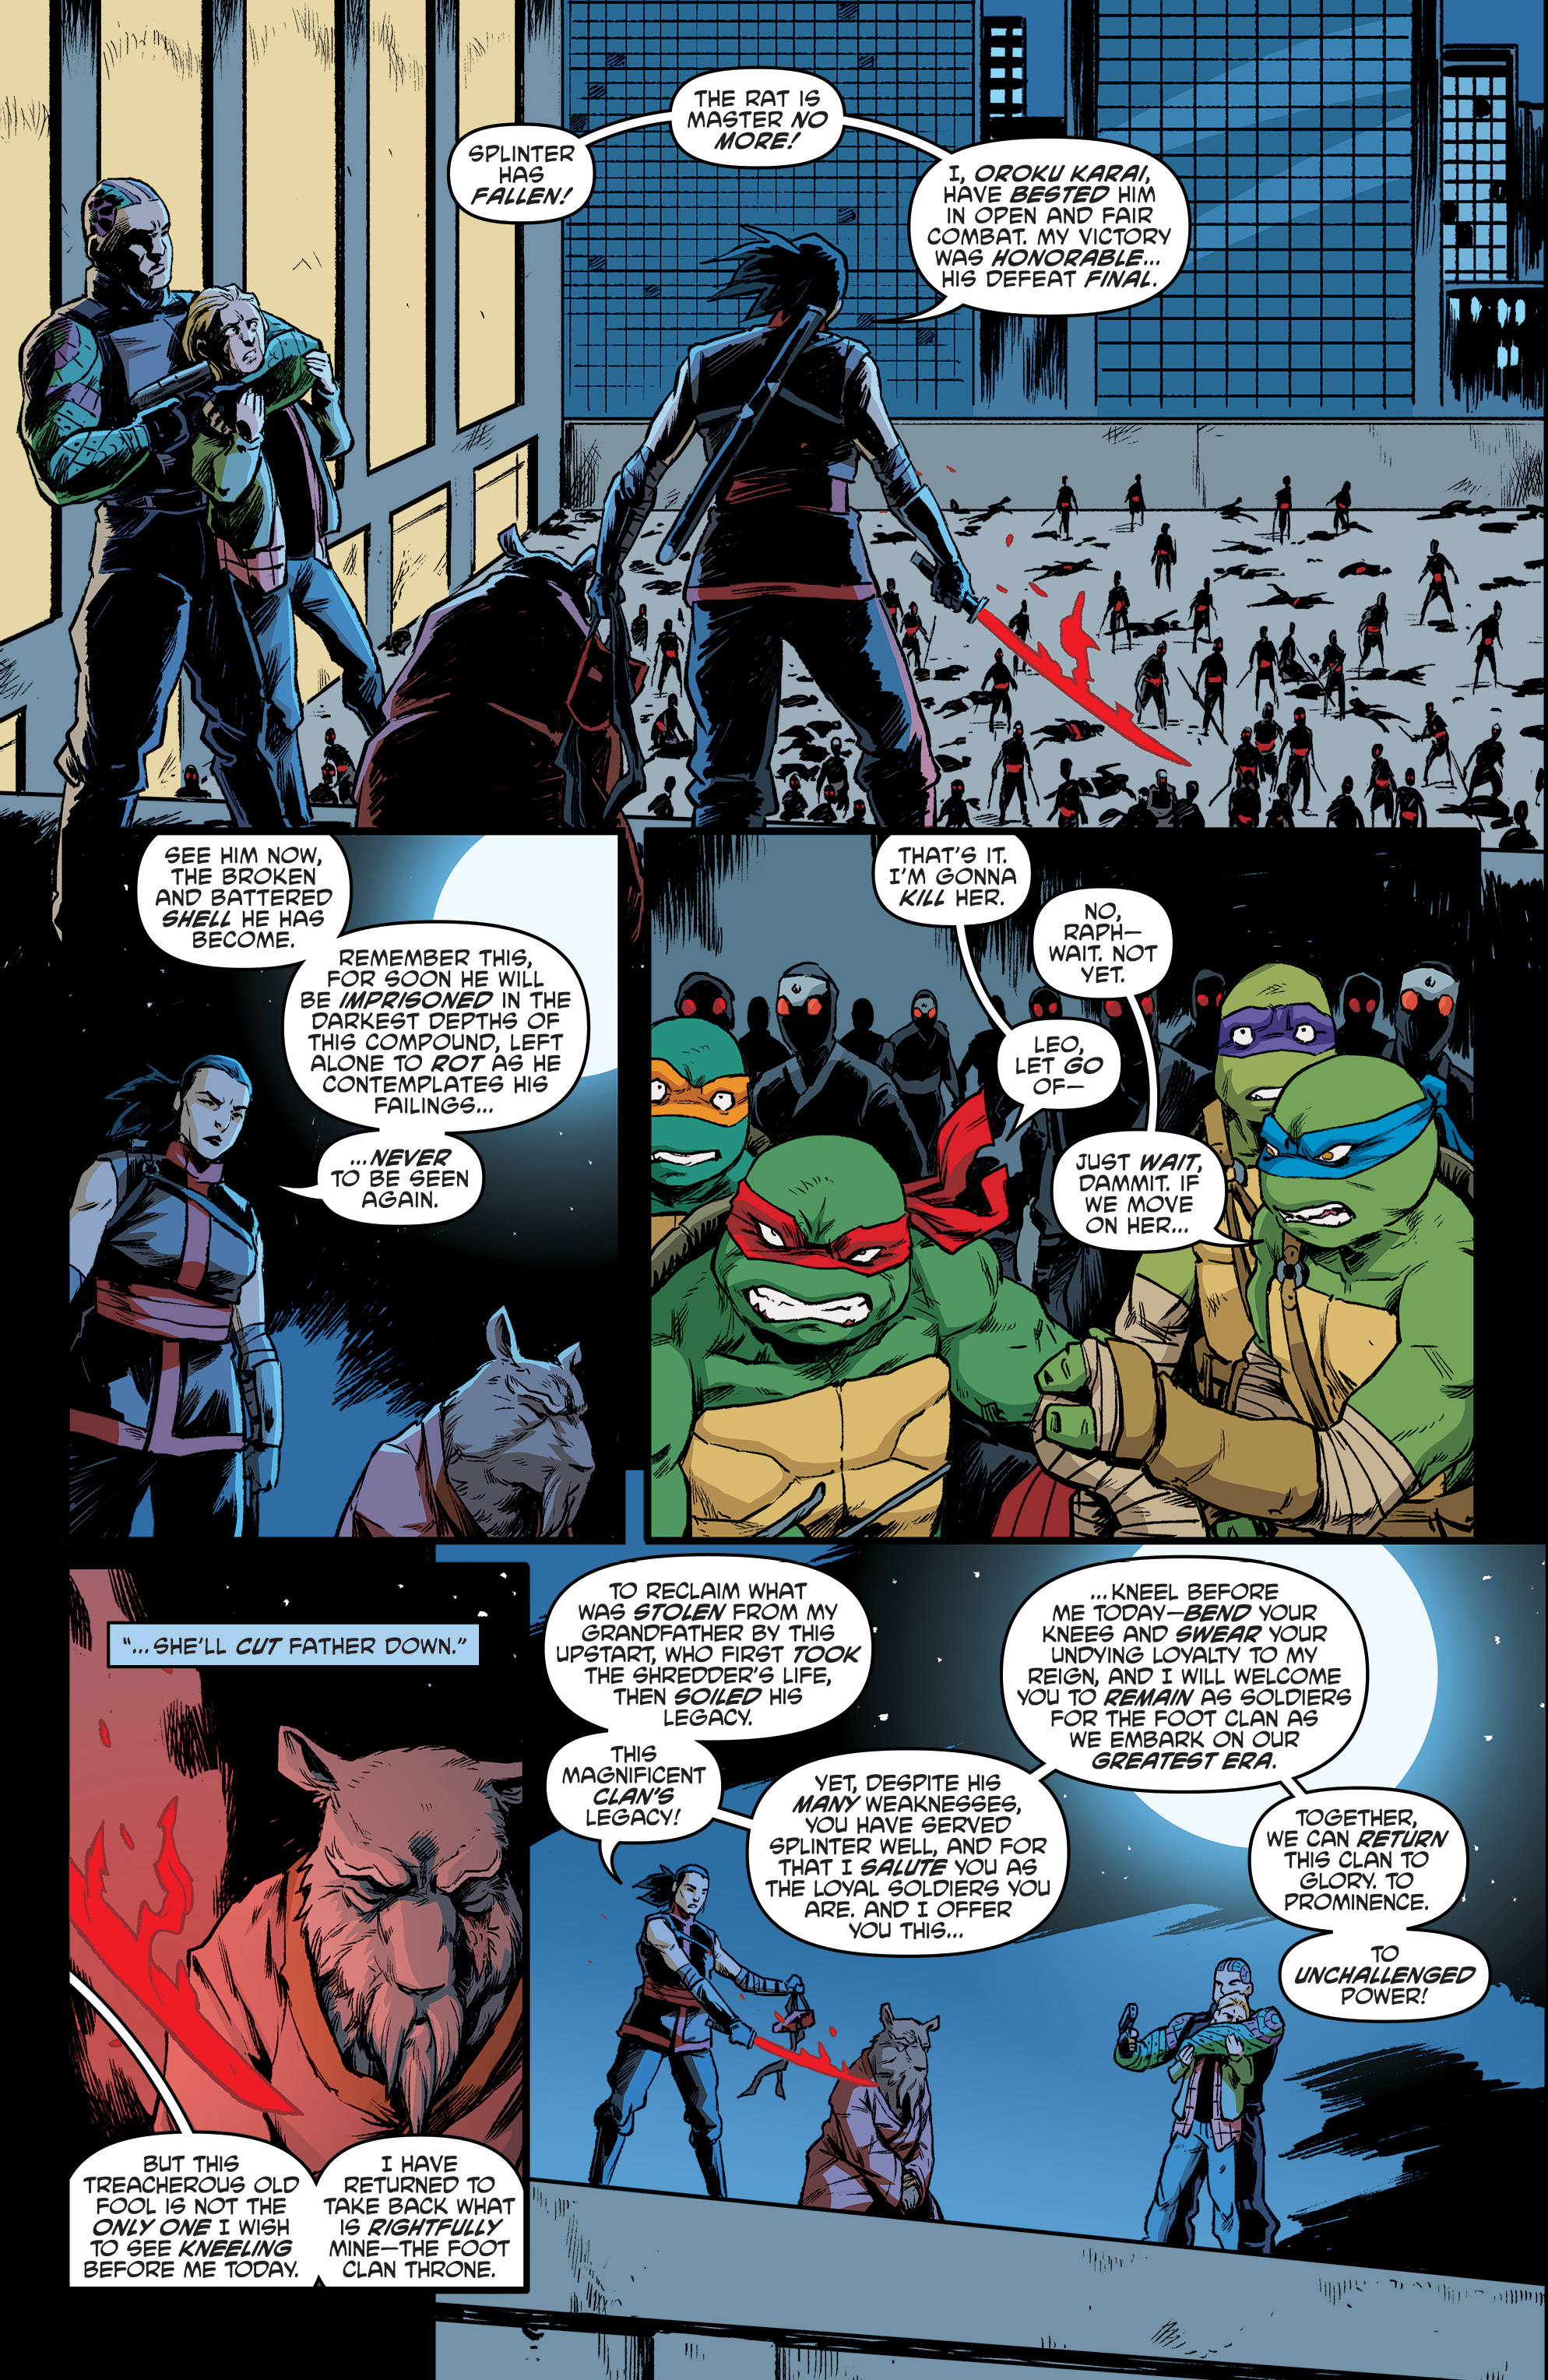 Welcome Back, Mikey and Raph Boyfriend scenarios (TMNT 2012) (FemalexMikey  or Raph)